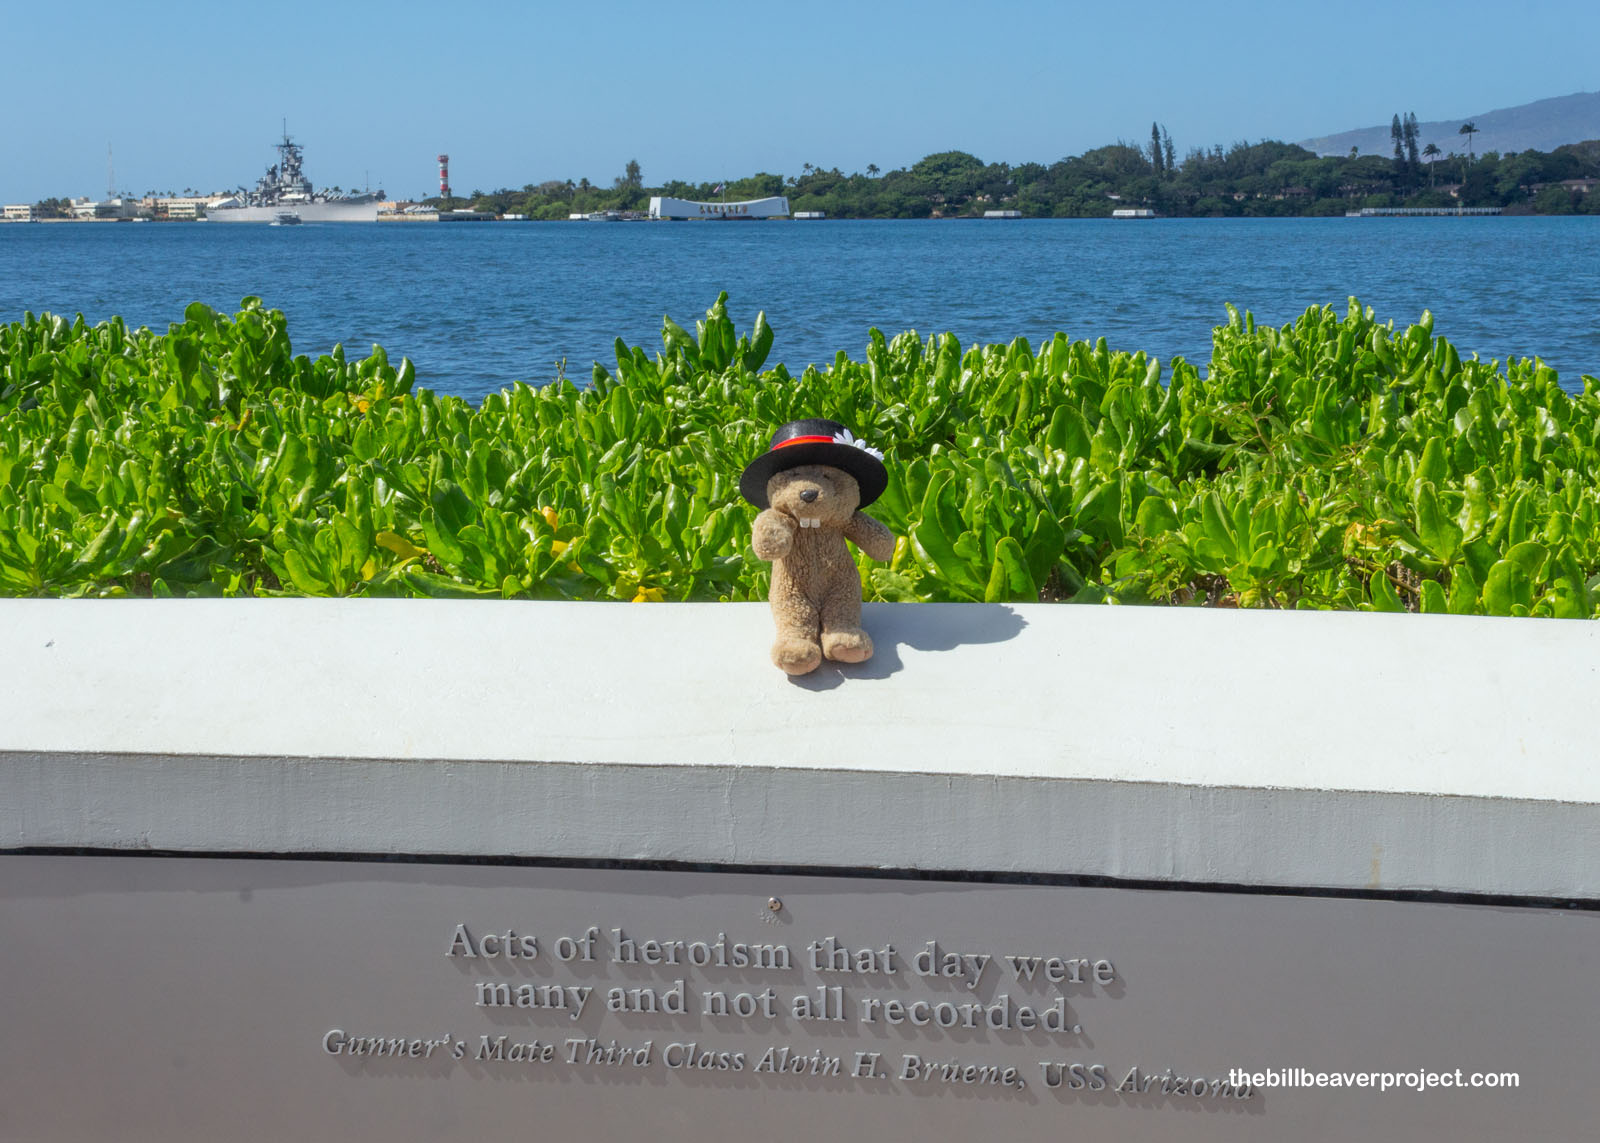 The Arizona memorial in the background!